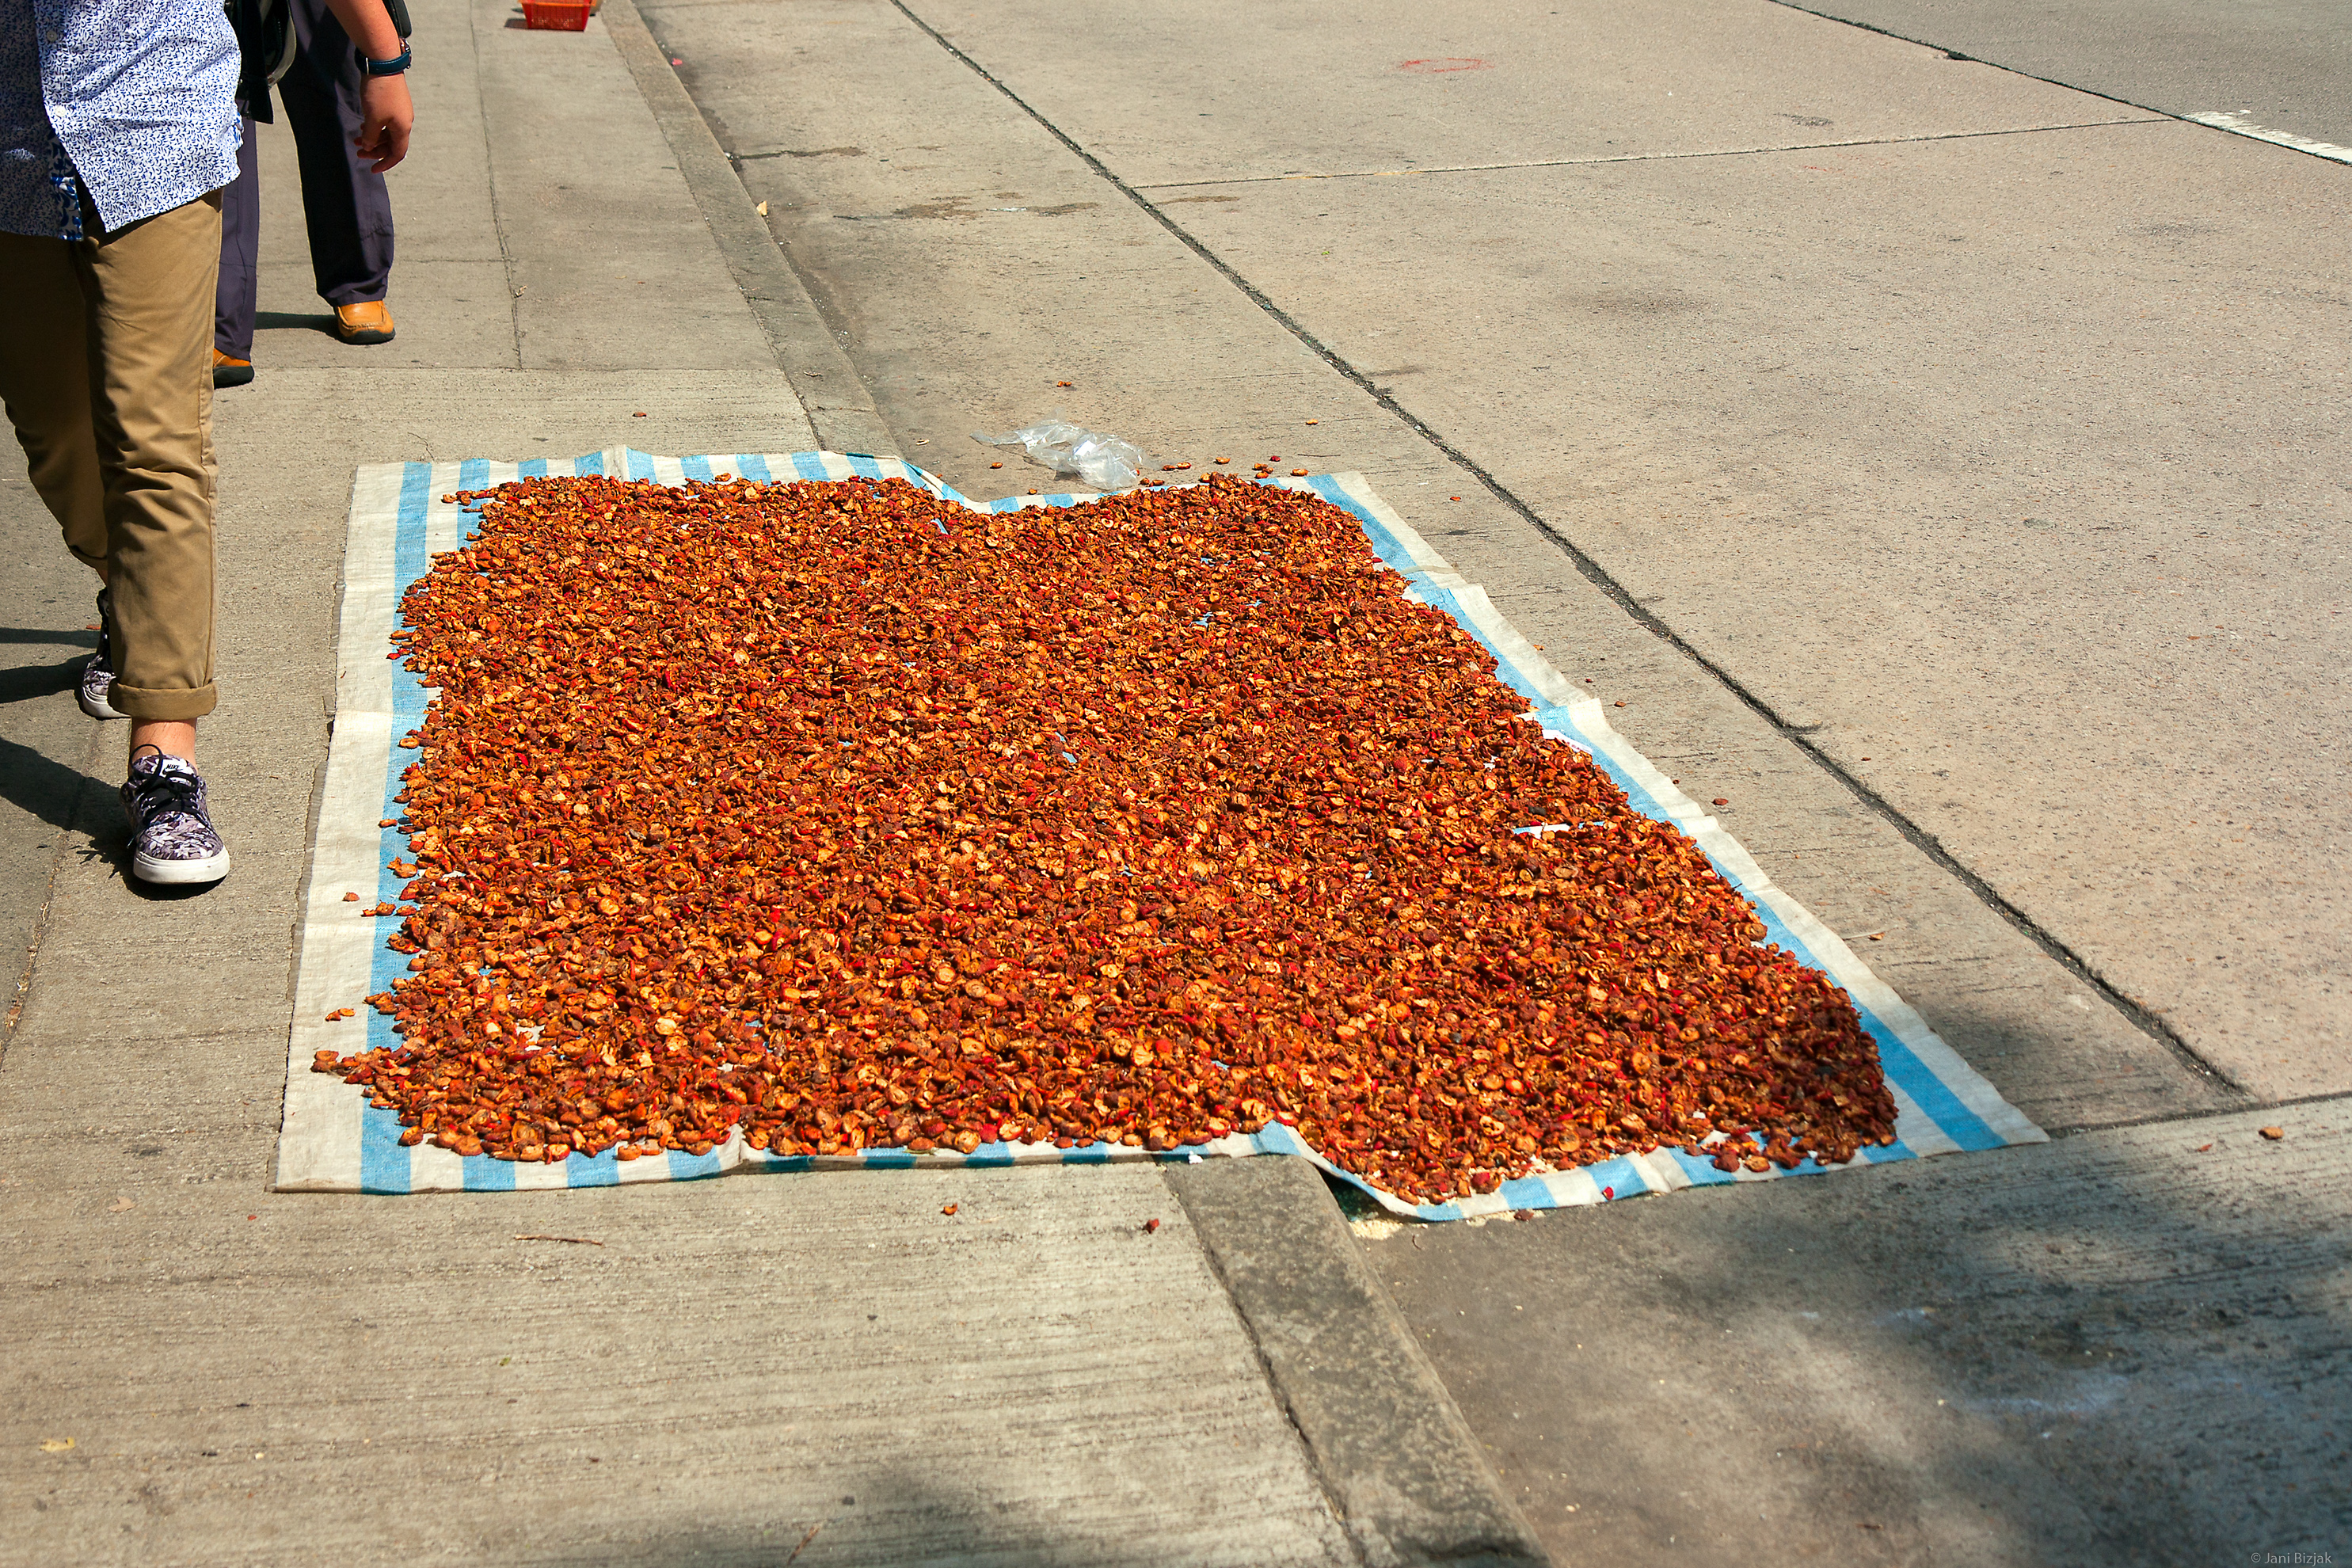 Someone drying spices on the street